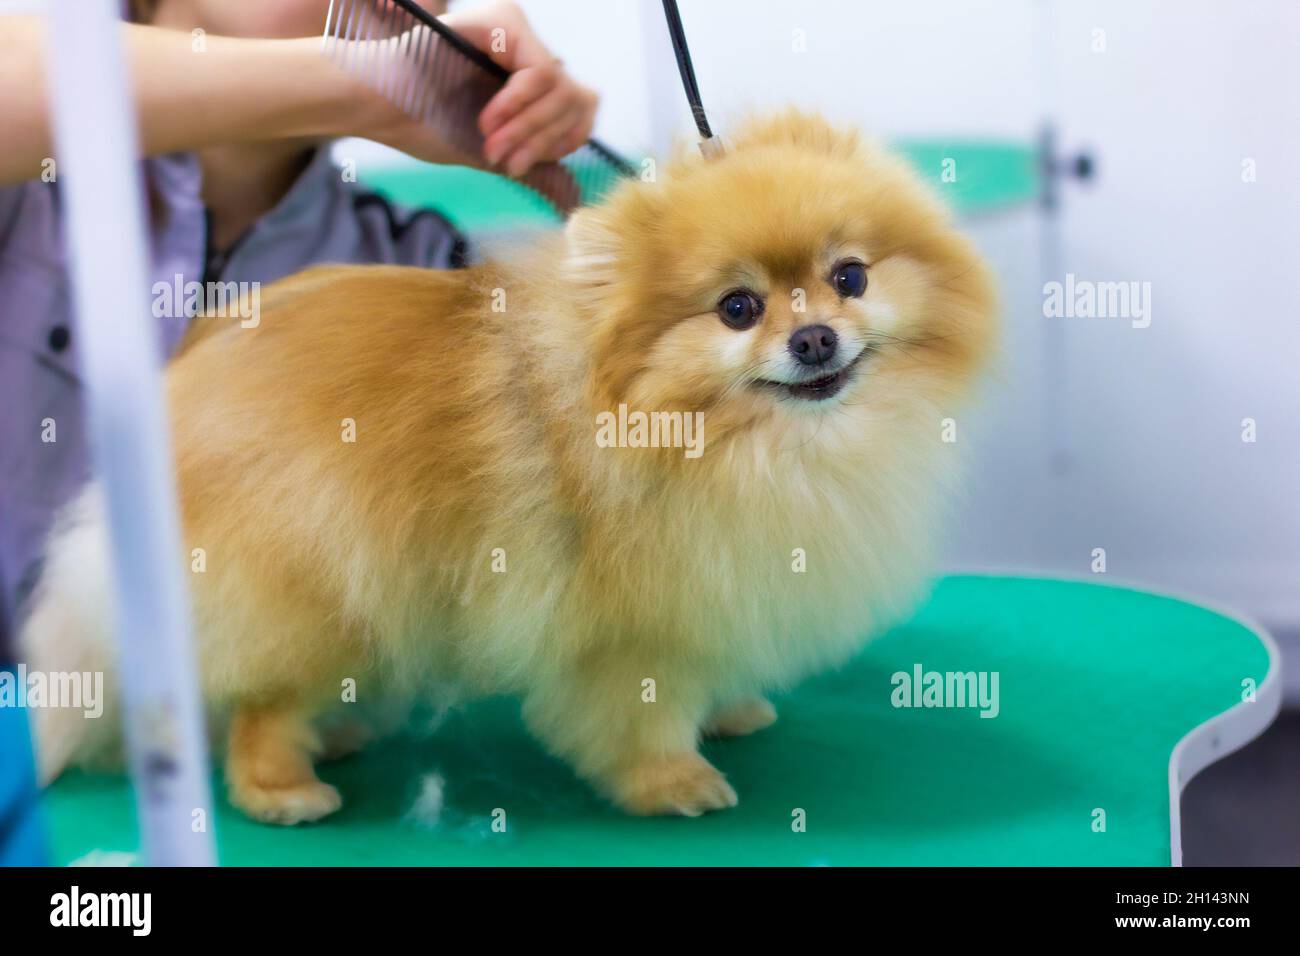 A young woman combs and dries the dog's fur, looks after a puppy in the salon People, work, profession and animal care. Stock Photo